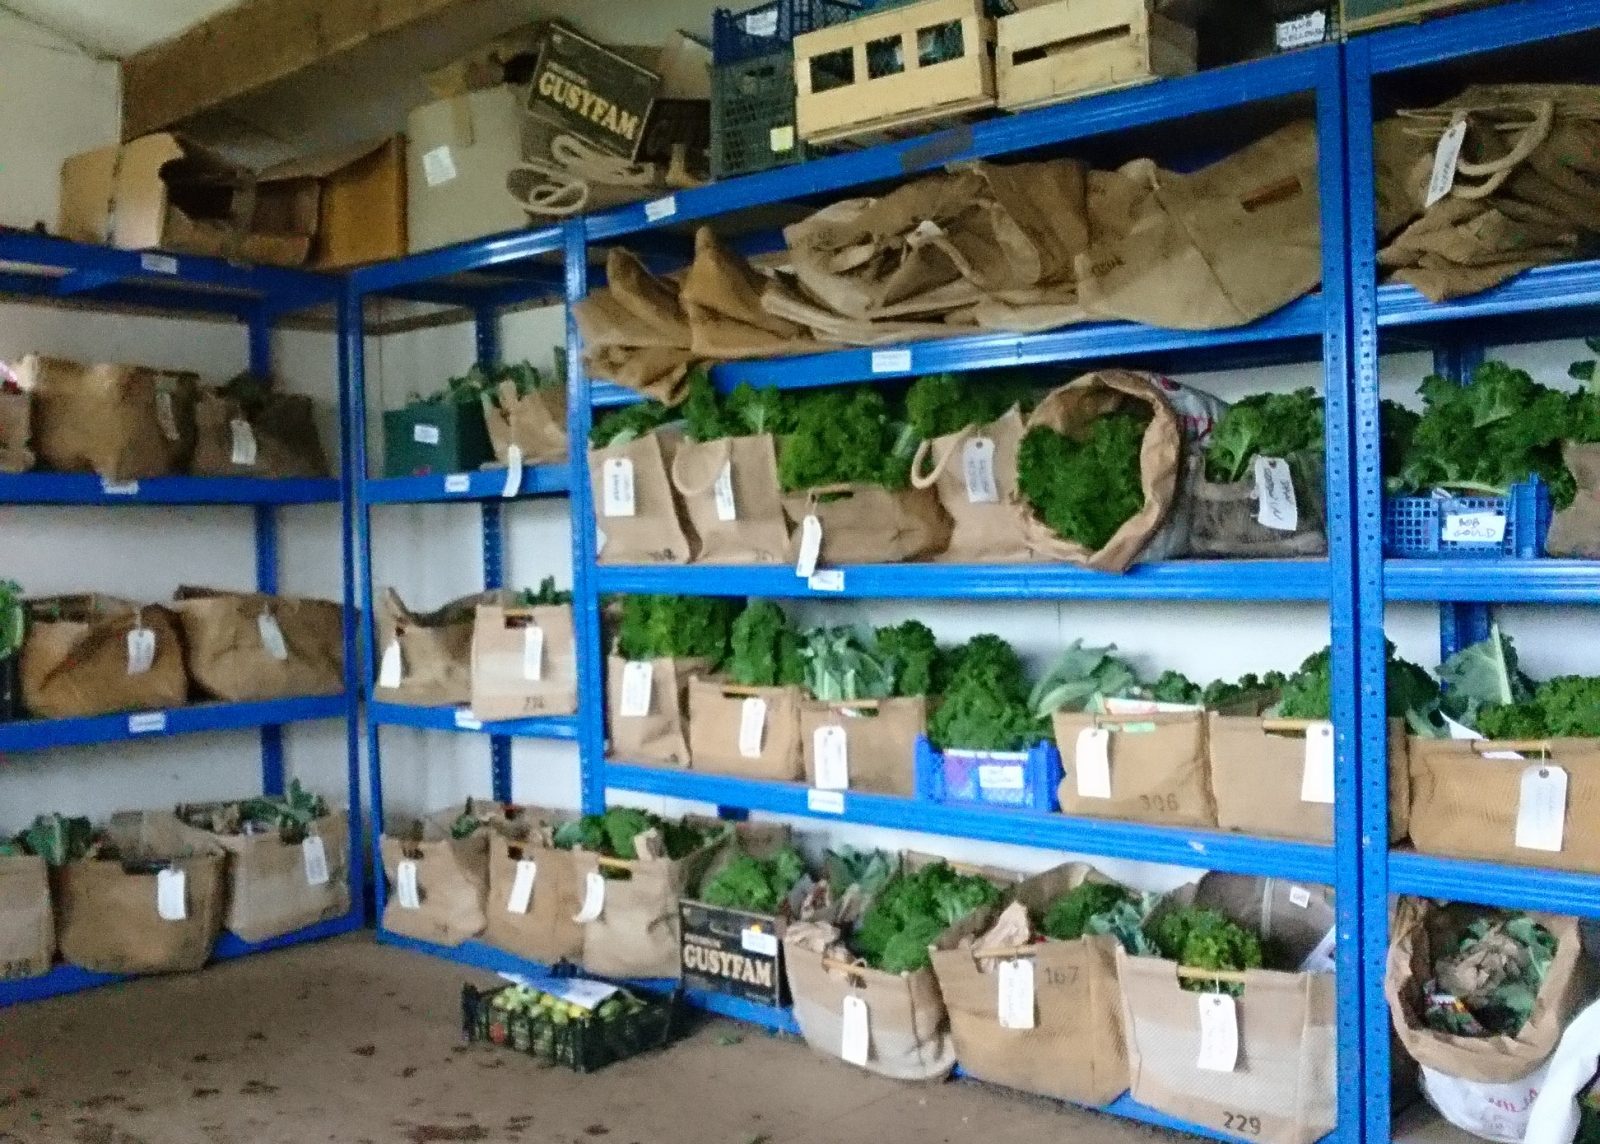 veg-boxes-packing-shed-camelcsa-091118